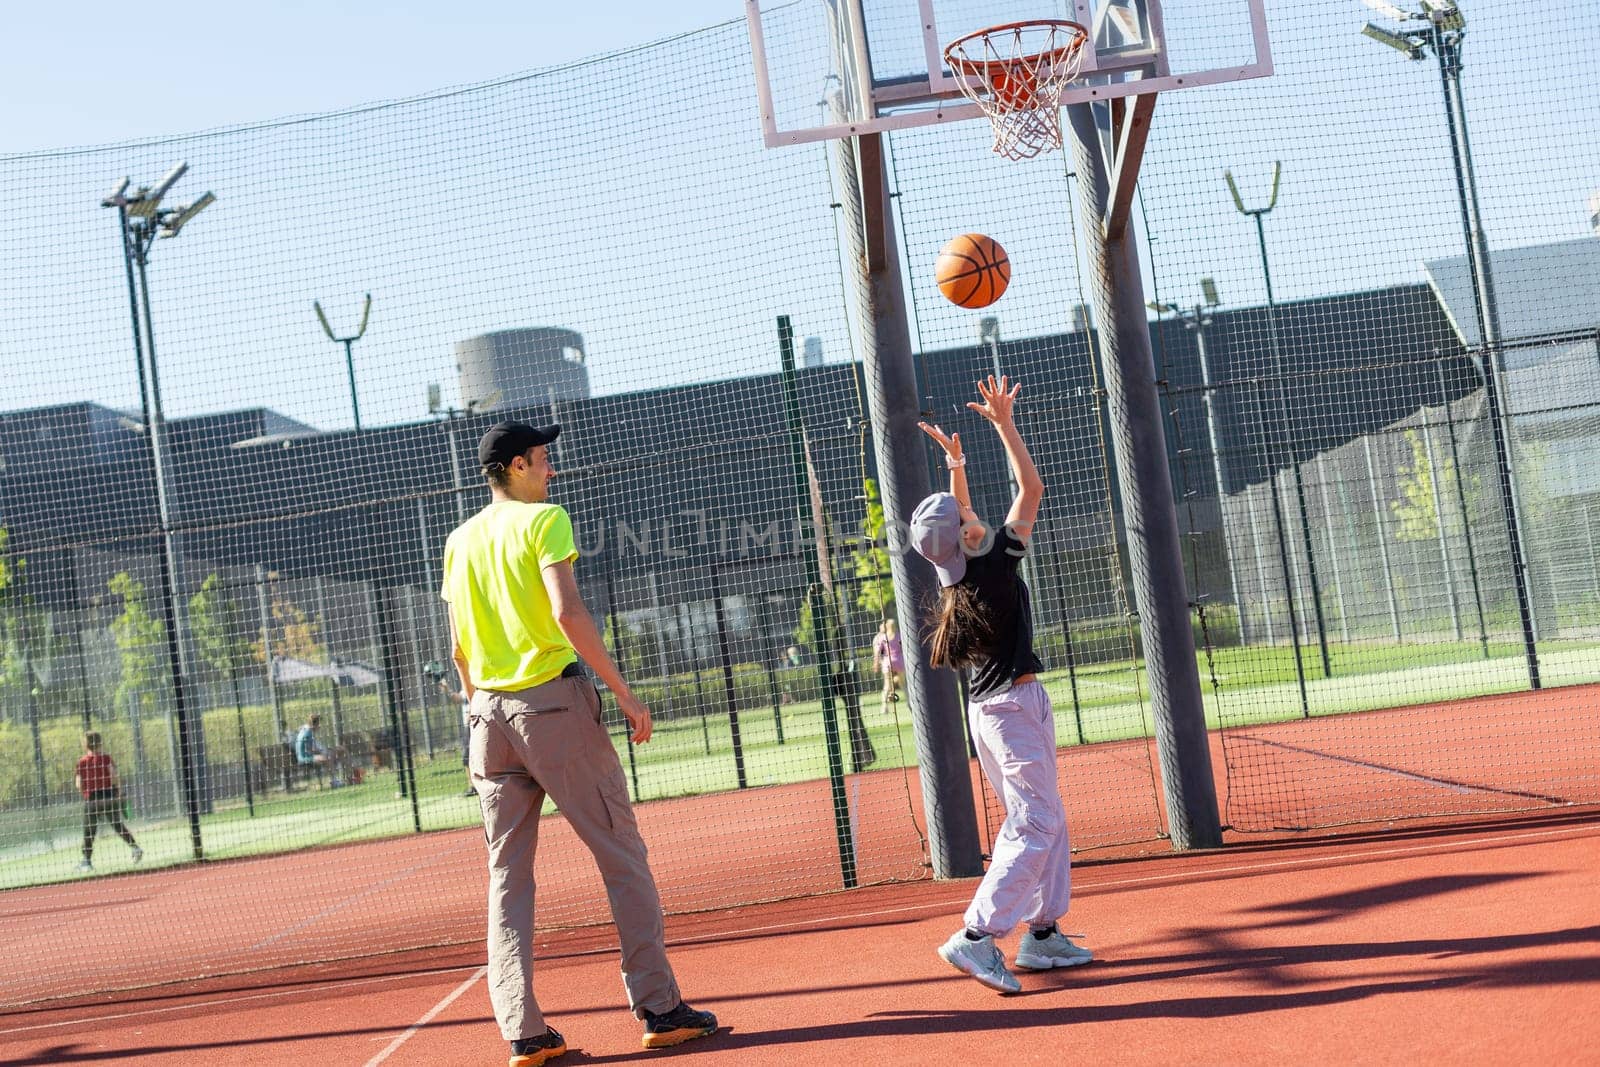 father and daughter playing basketball together on playground. High quality photo